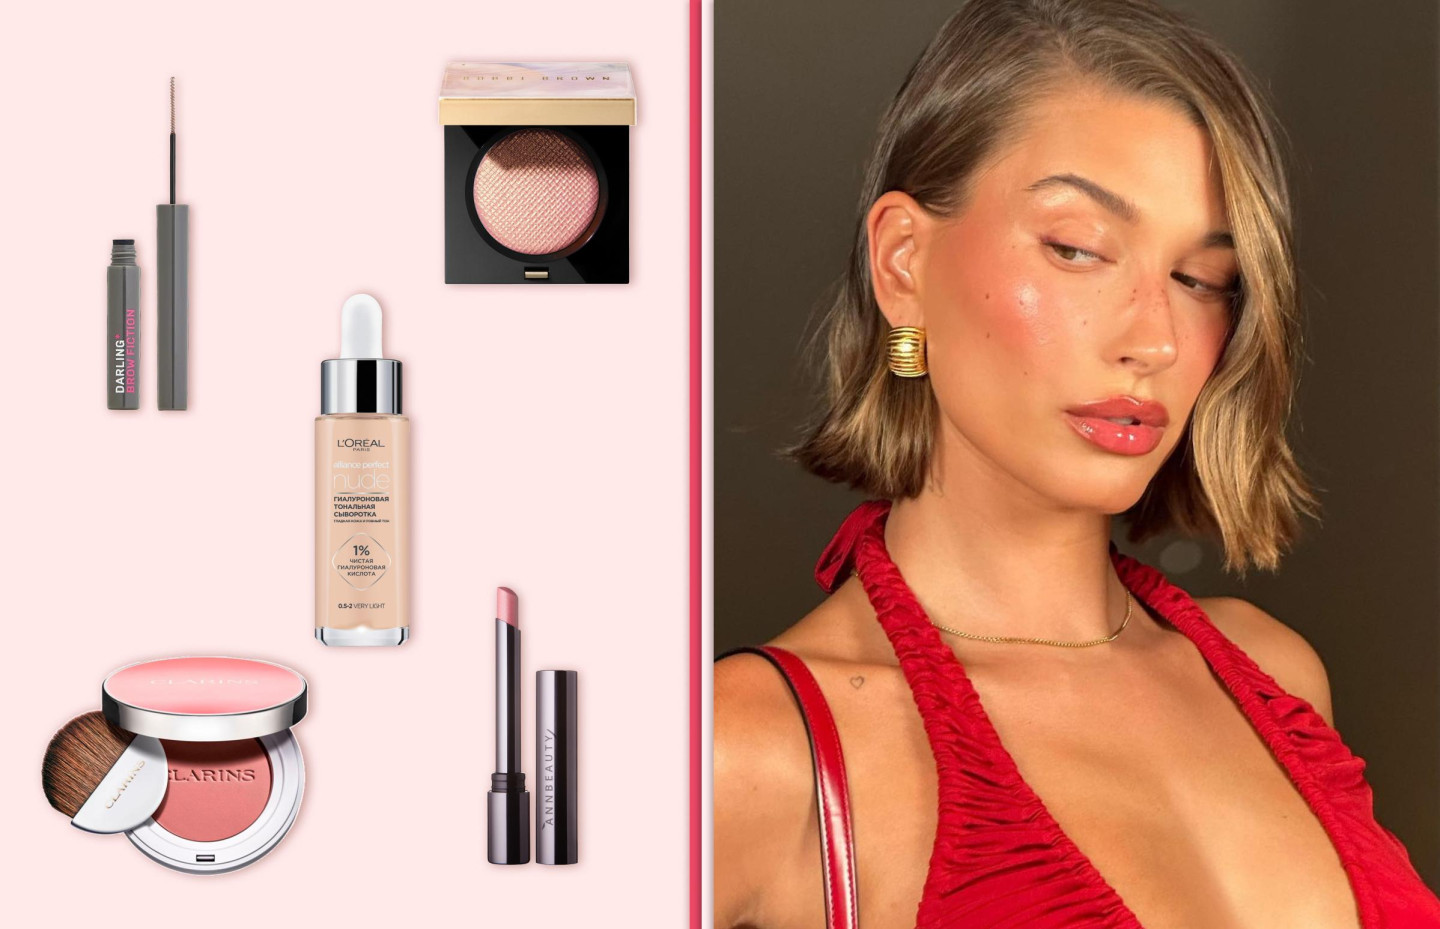 How to do strawberry makeup: tips from makeup artists